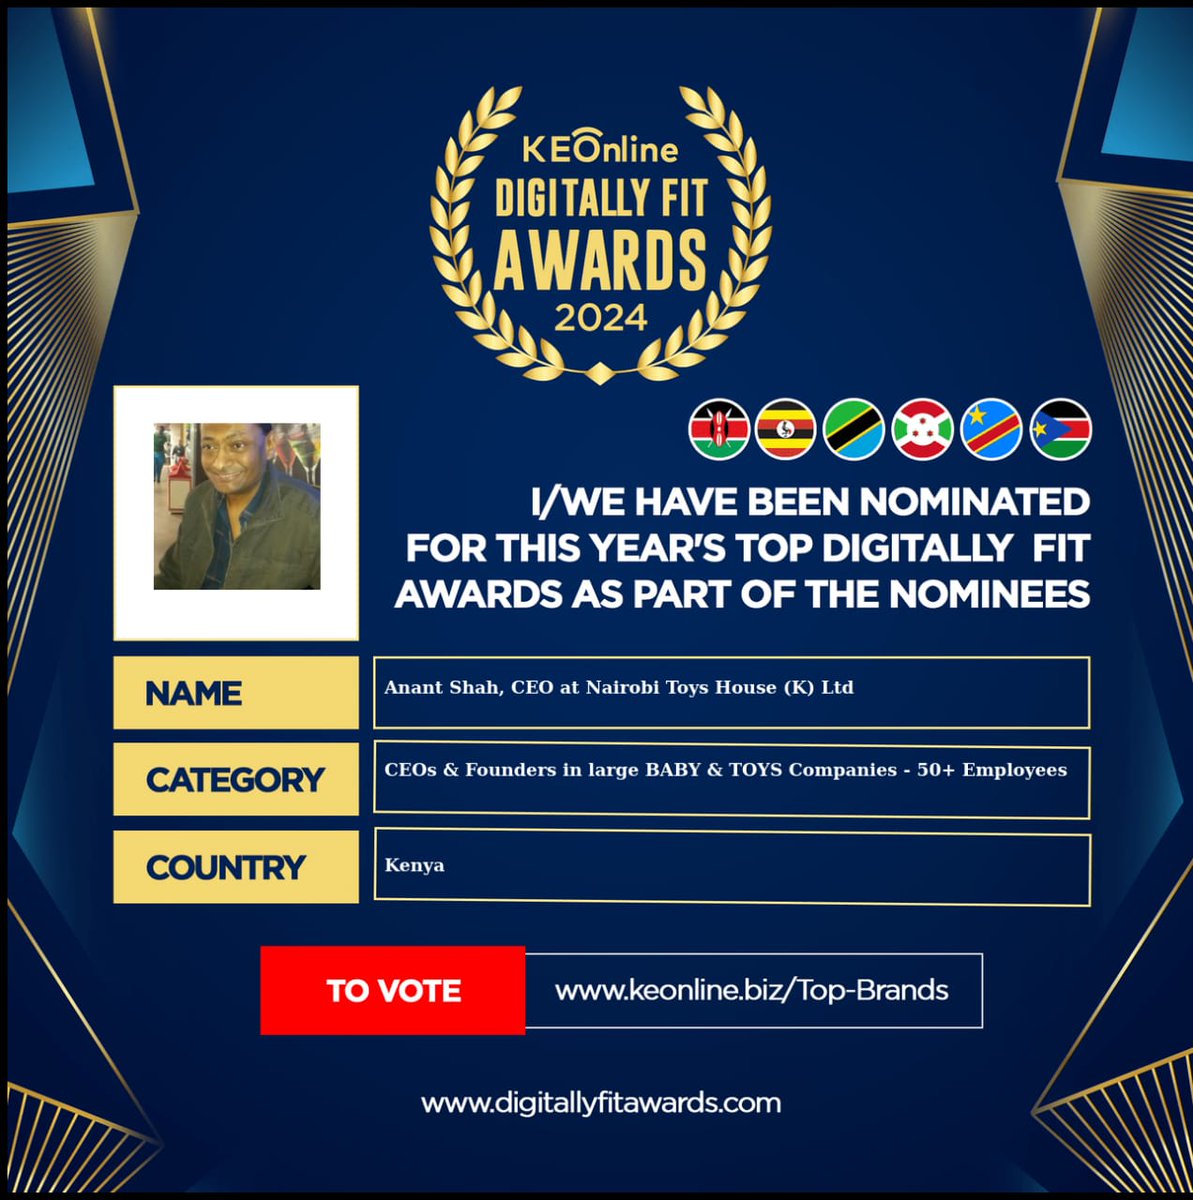 Anant Shah, CEO of Nairobi Toys House (K) Ltd, calls for your vote, contributing to Kenya's entrepreneurial landscape in baby and toys.
#DigitallyFitAwardsVote2024
Person of the Year 
KEONLINE